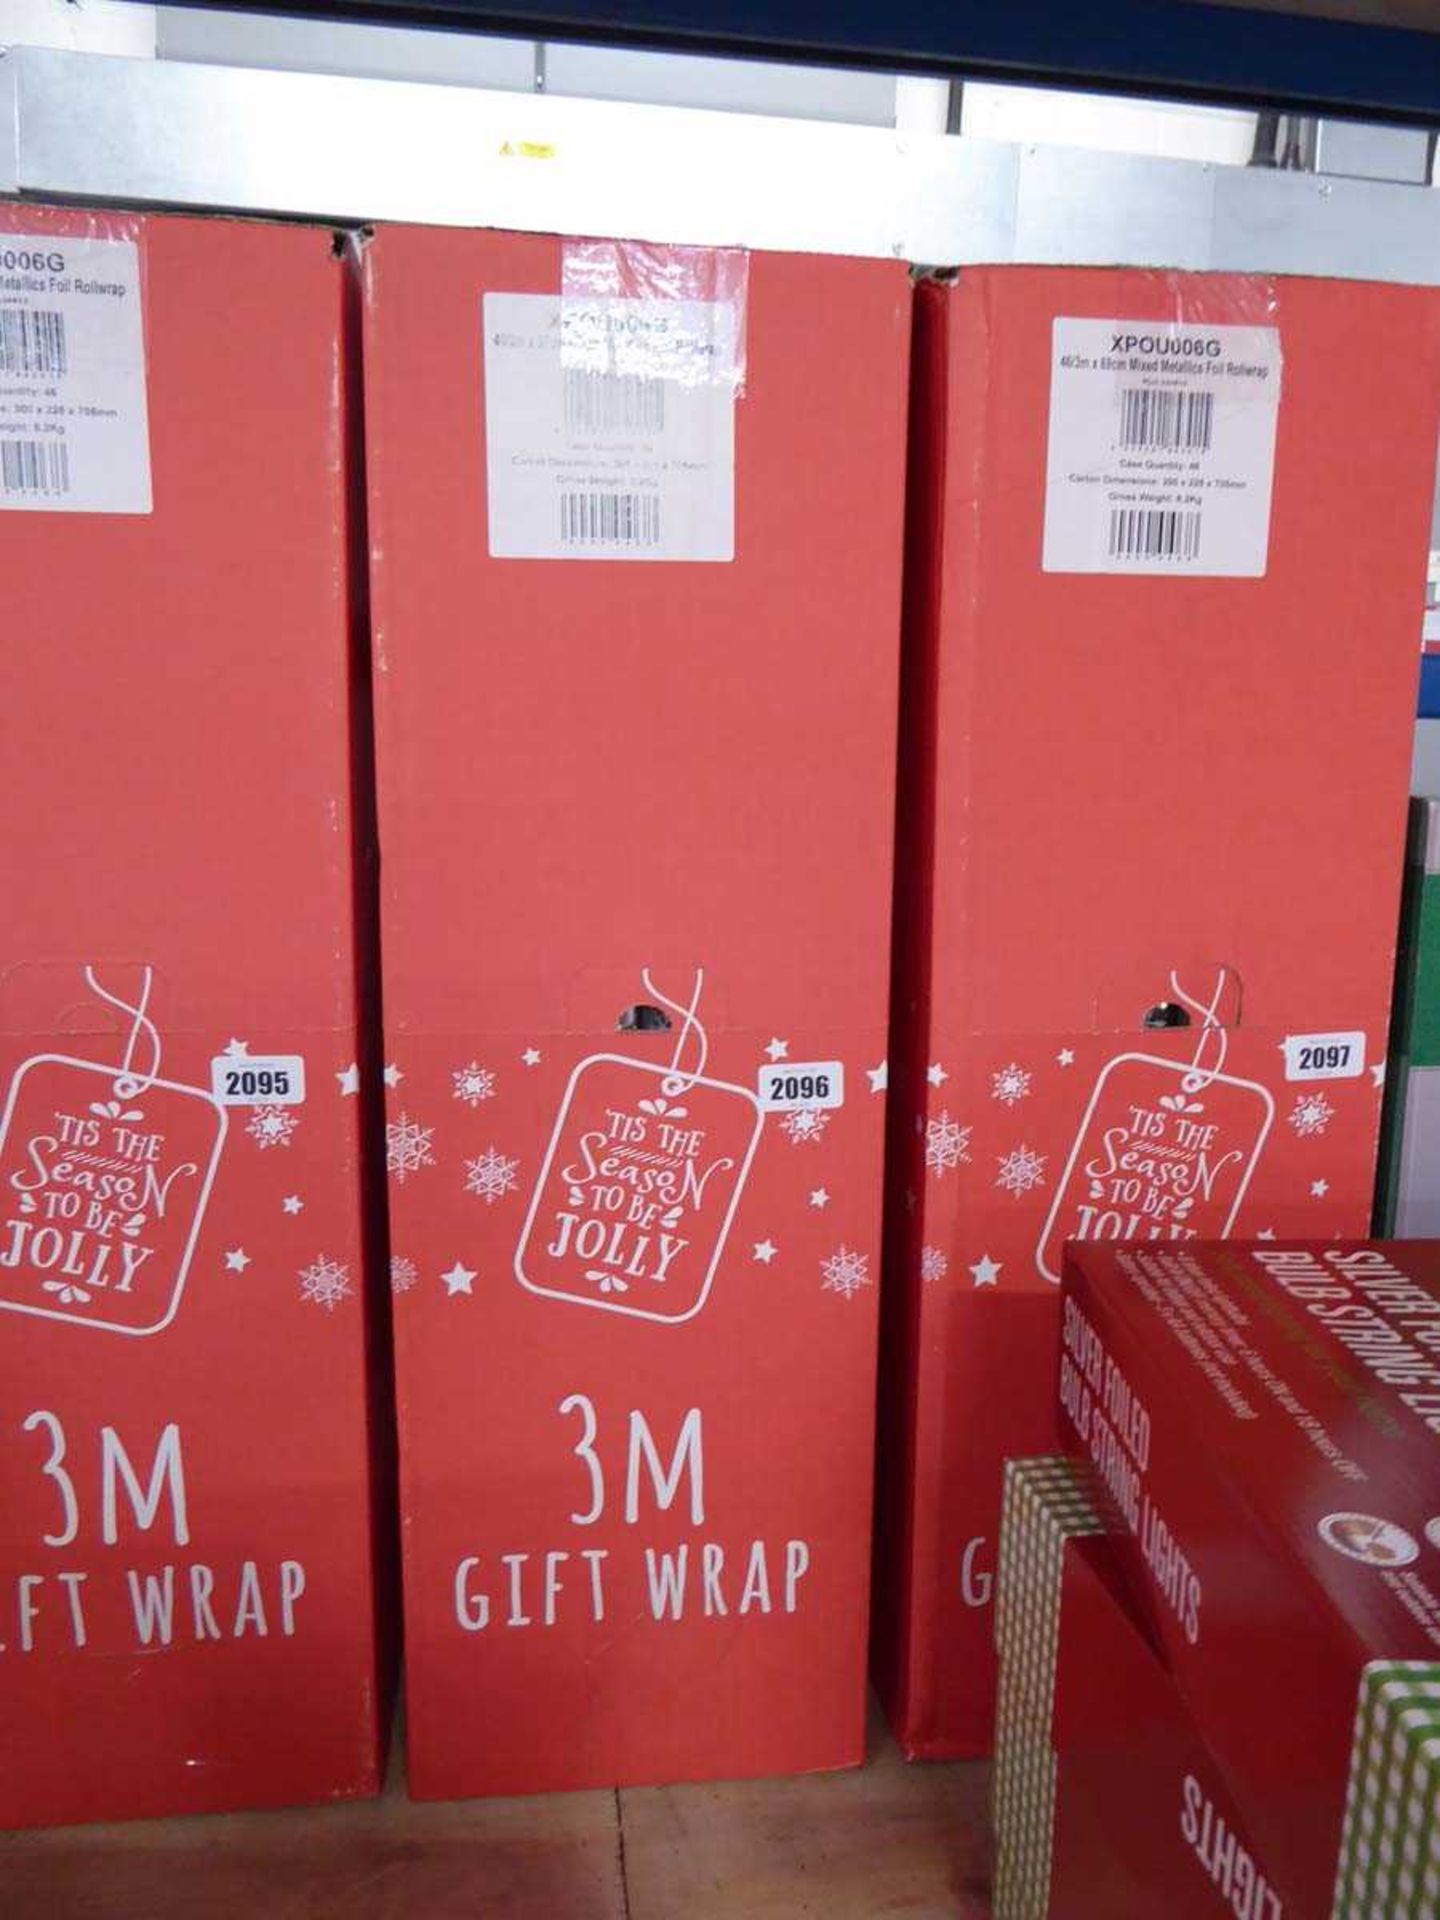 Box containing approx. 45 3m rolls of Christmas gift wrap